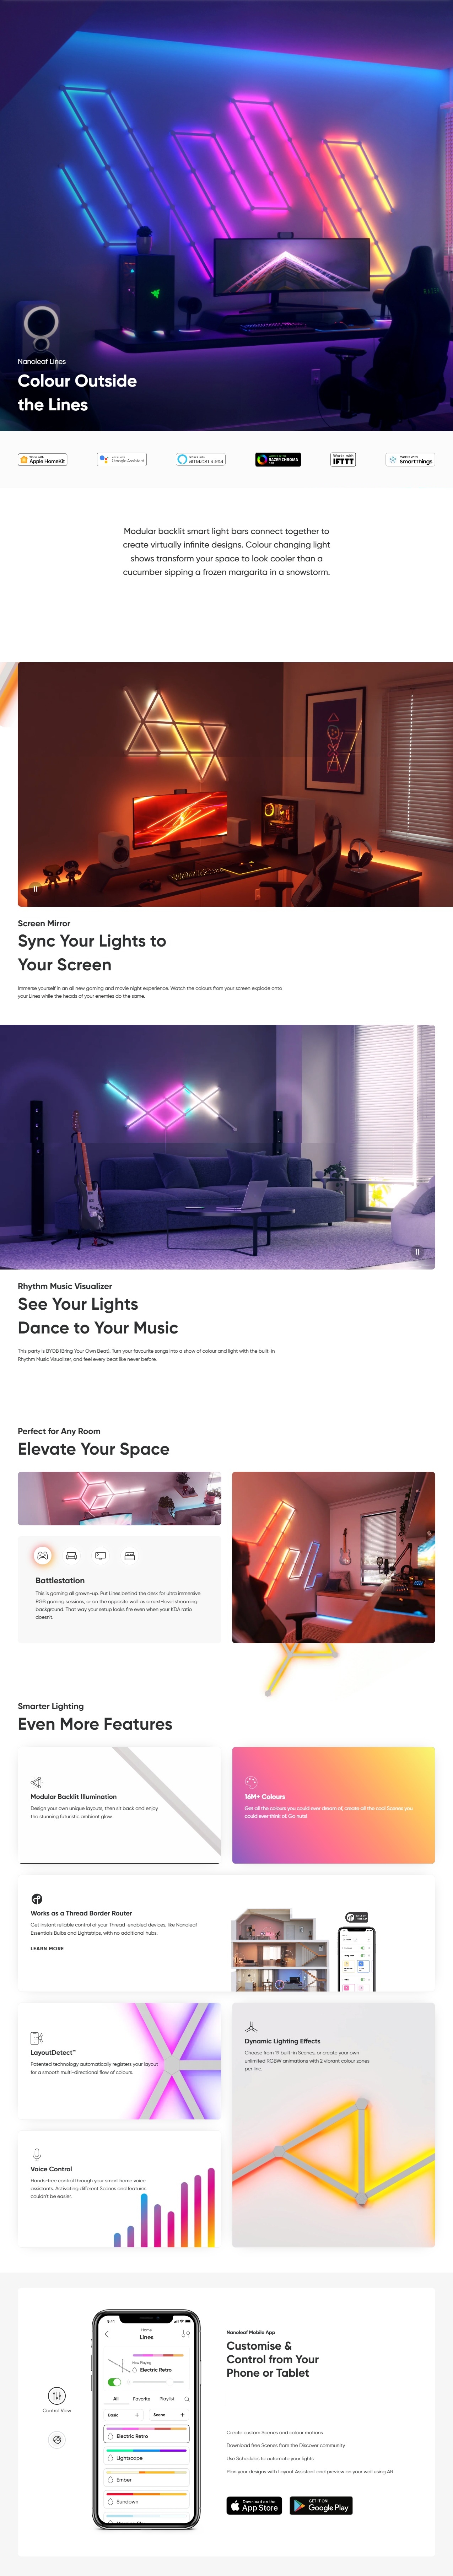 A large marketing image providing additional information about the product Nanoleaf Lines Starter Kit - 9 Pack - Additional alt info not provided